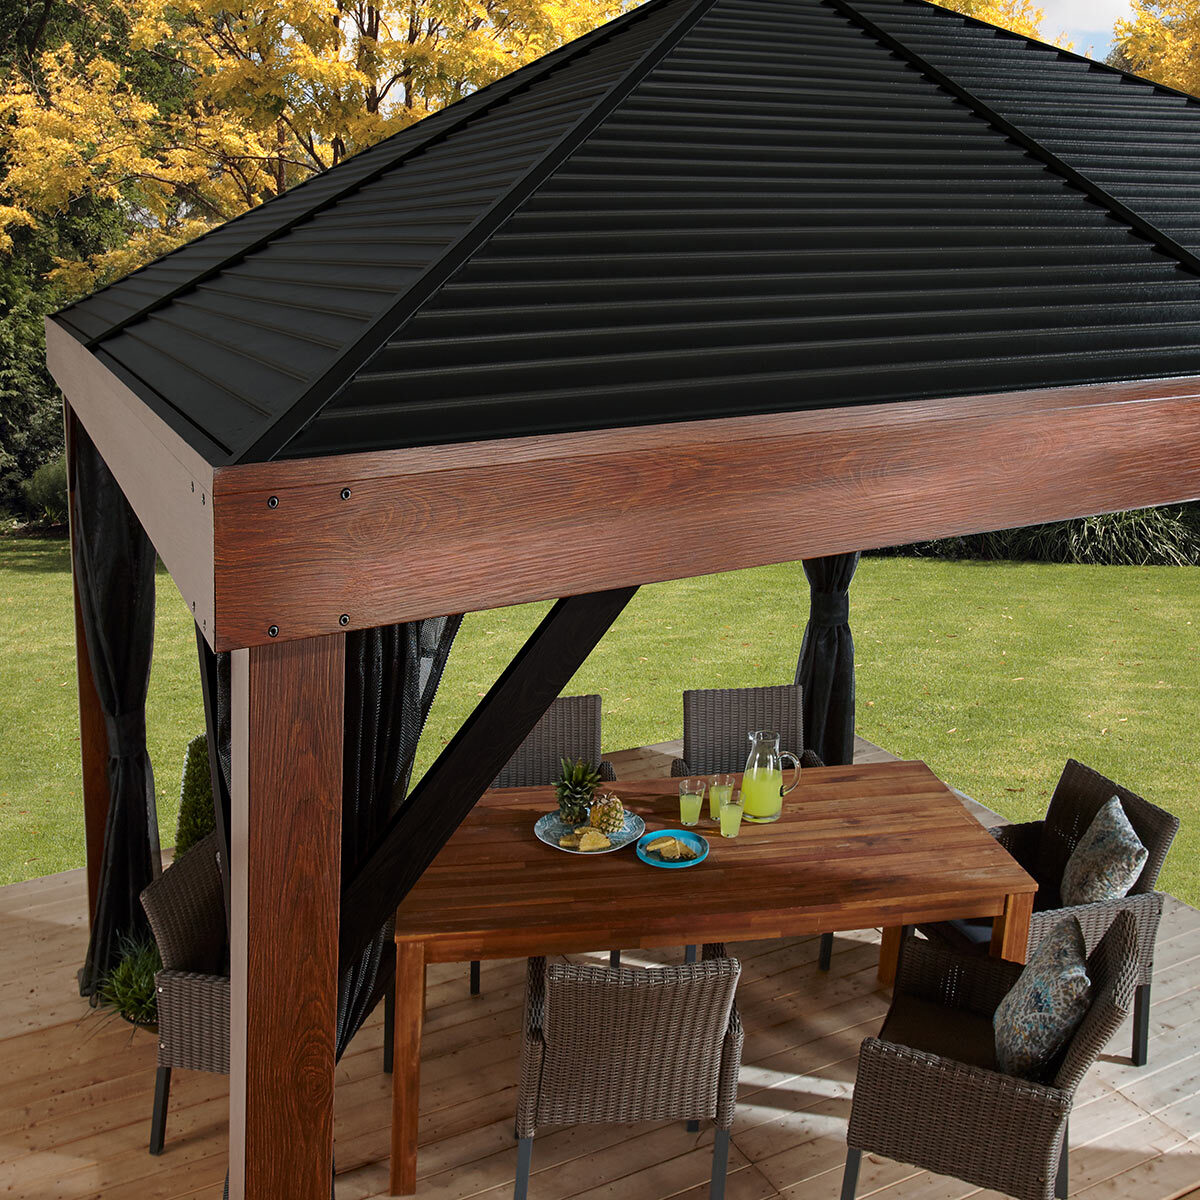 Sojag Valencia 12ft x 12ft (3.63 x 3.63m) Wood Look Sun Shelter with Galvanised Steel Roof + Insect Netting